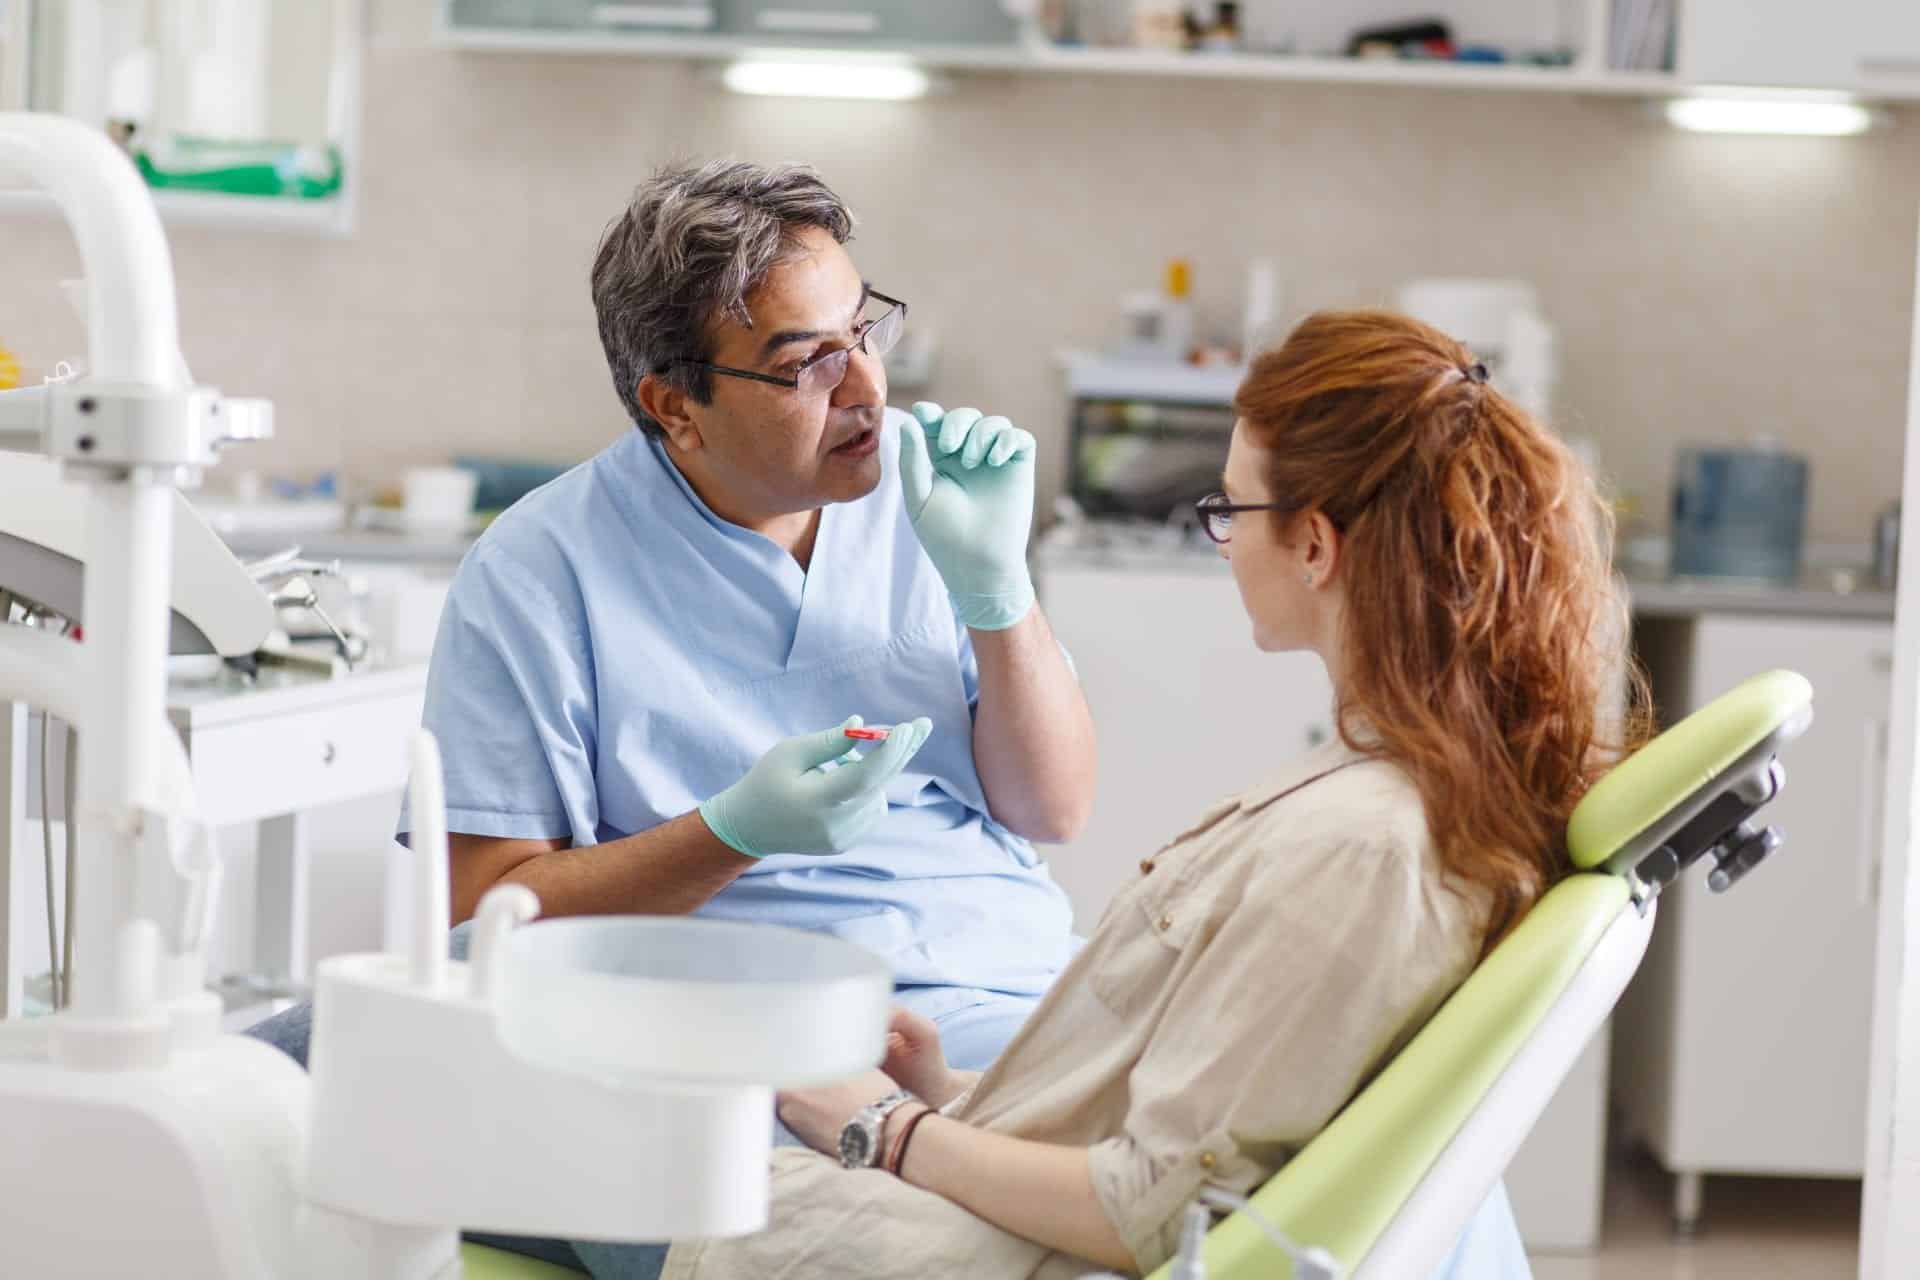 The Benefits of Dental Fillings: Why They're More Important than You Think! Dental Fillings in Rockwall, TX. Genuine Dentistry. General, Cosmetic, Restorative, Pediatric Dentist in Rockwall, TX 75087 Call:972-635-5336